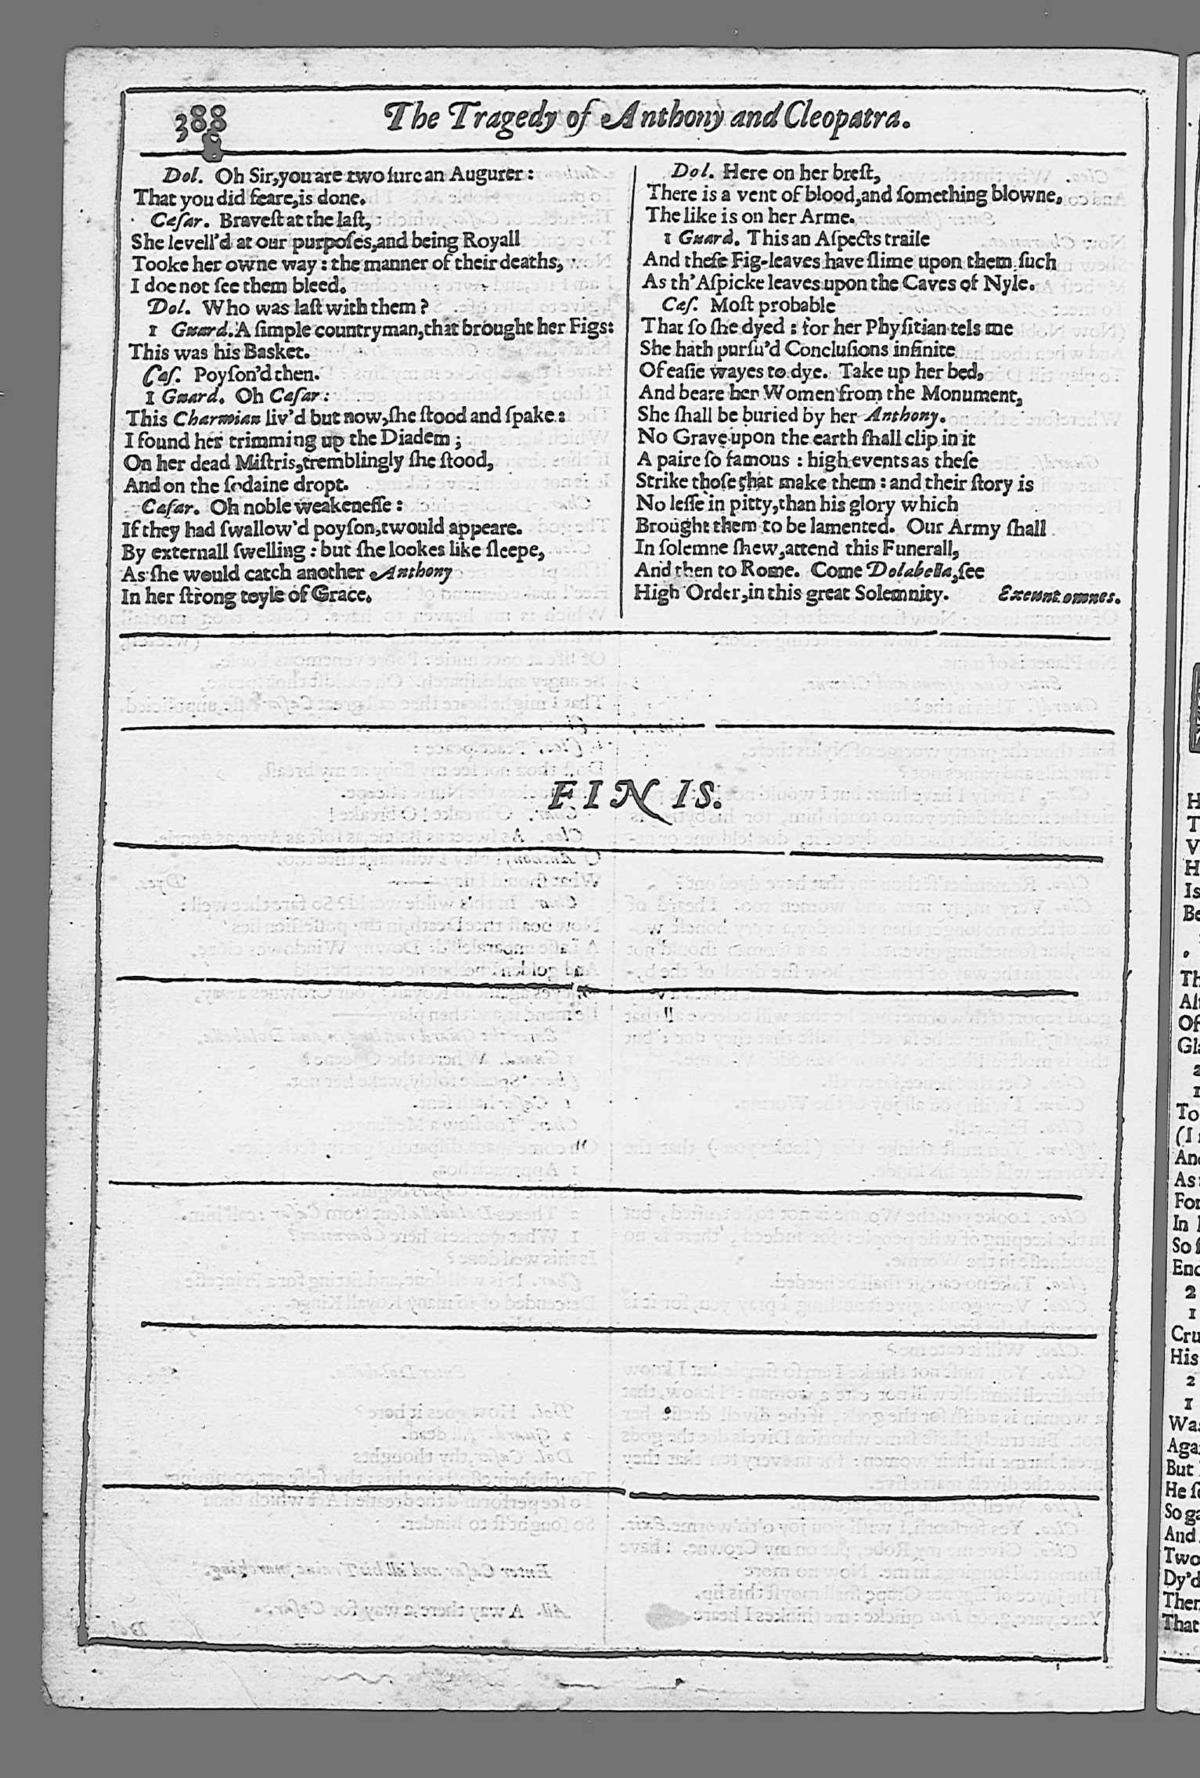 Image of page 876